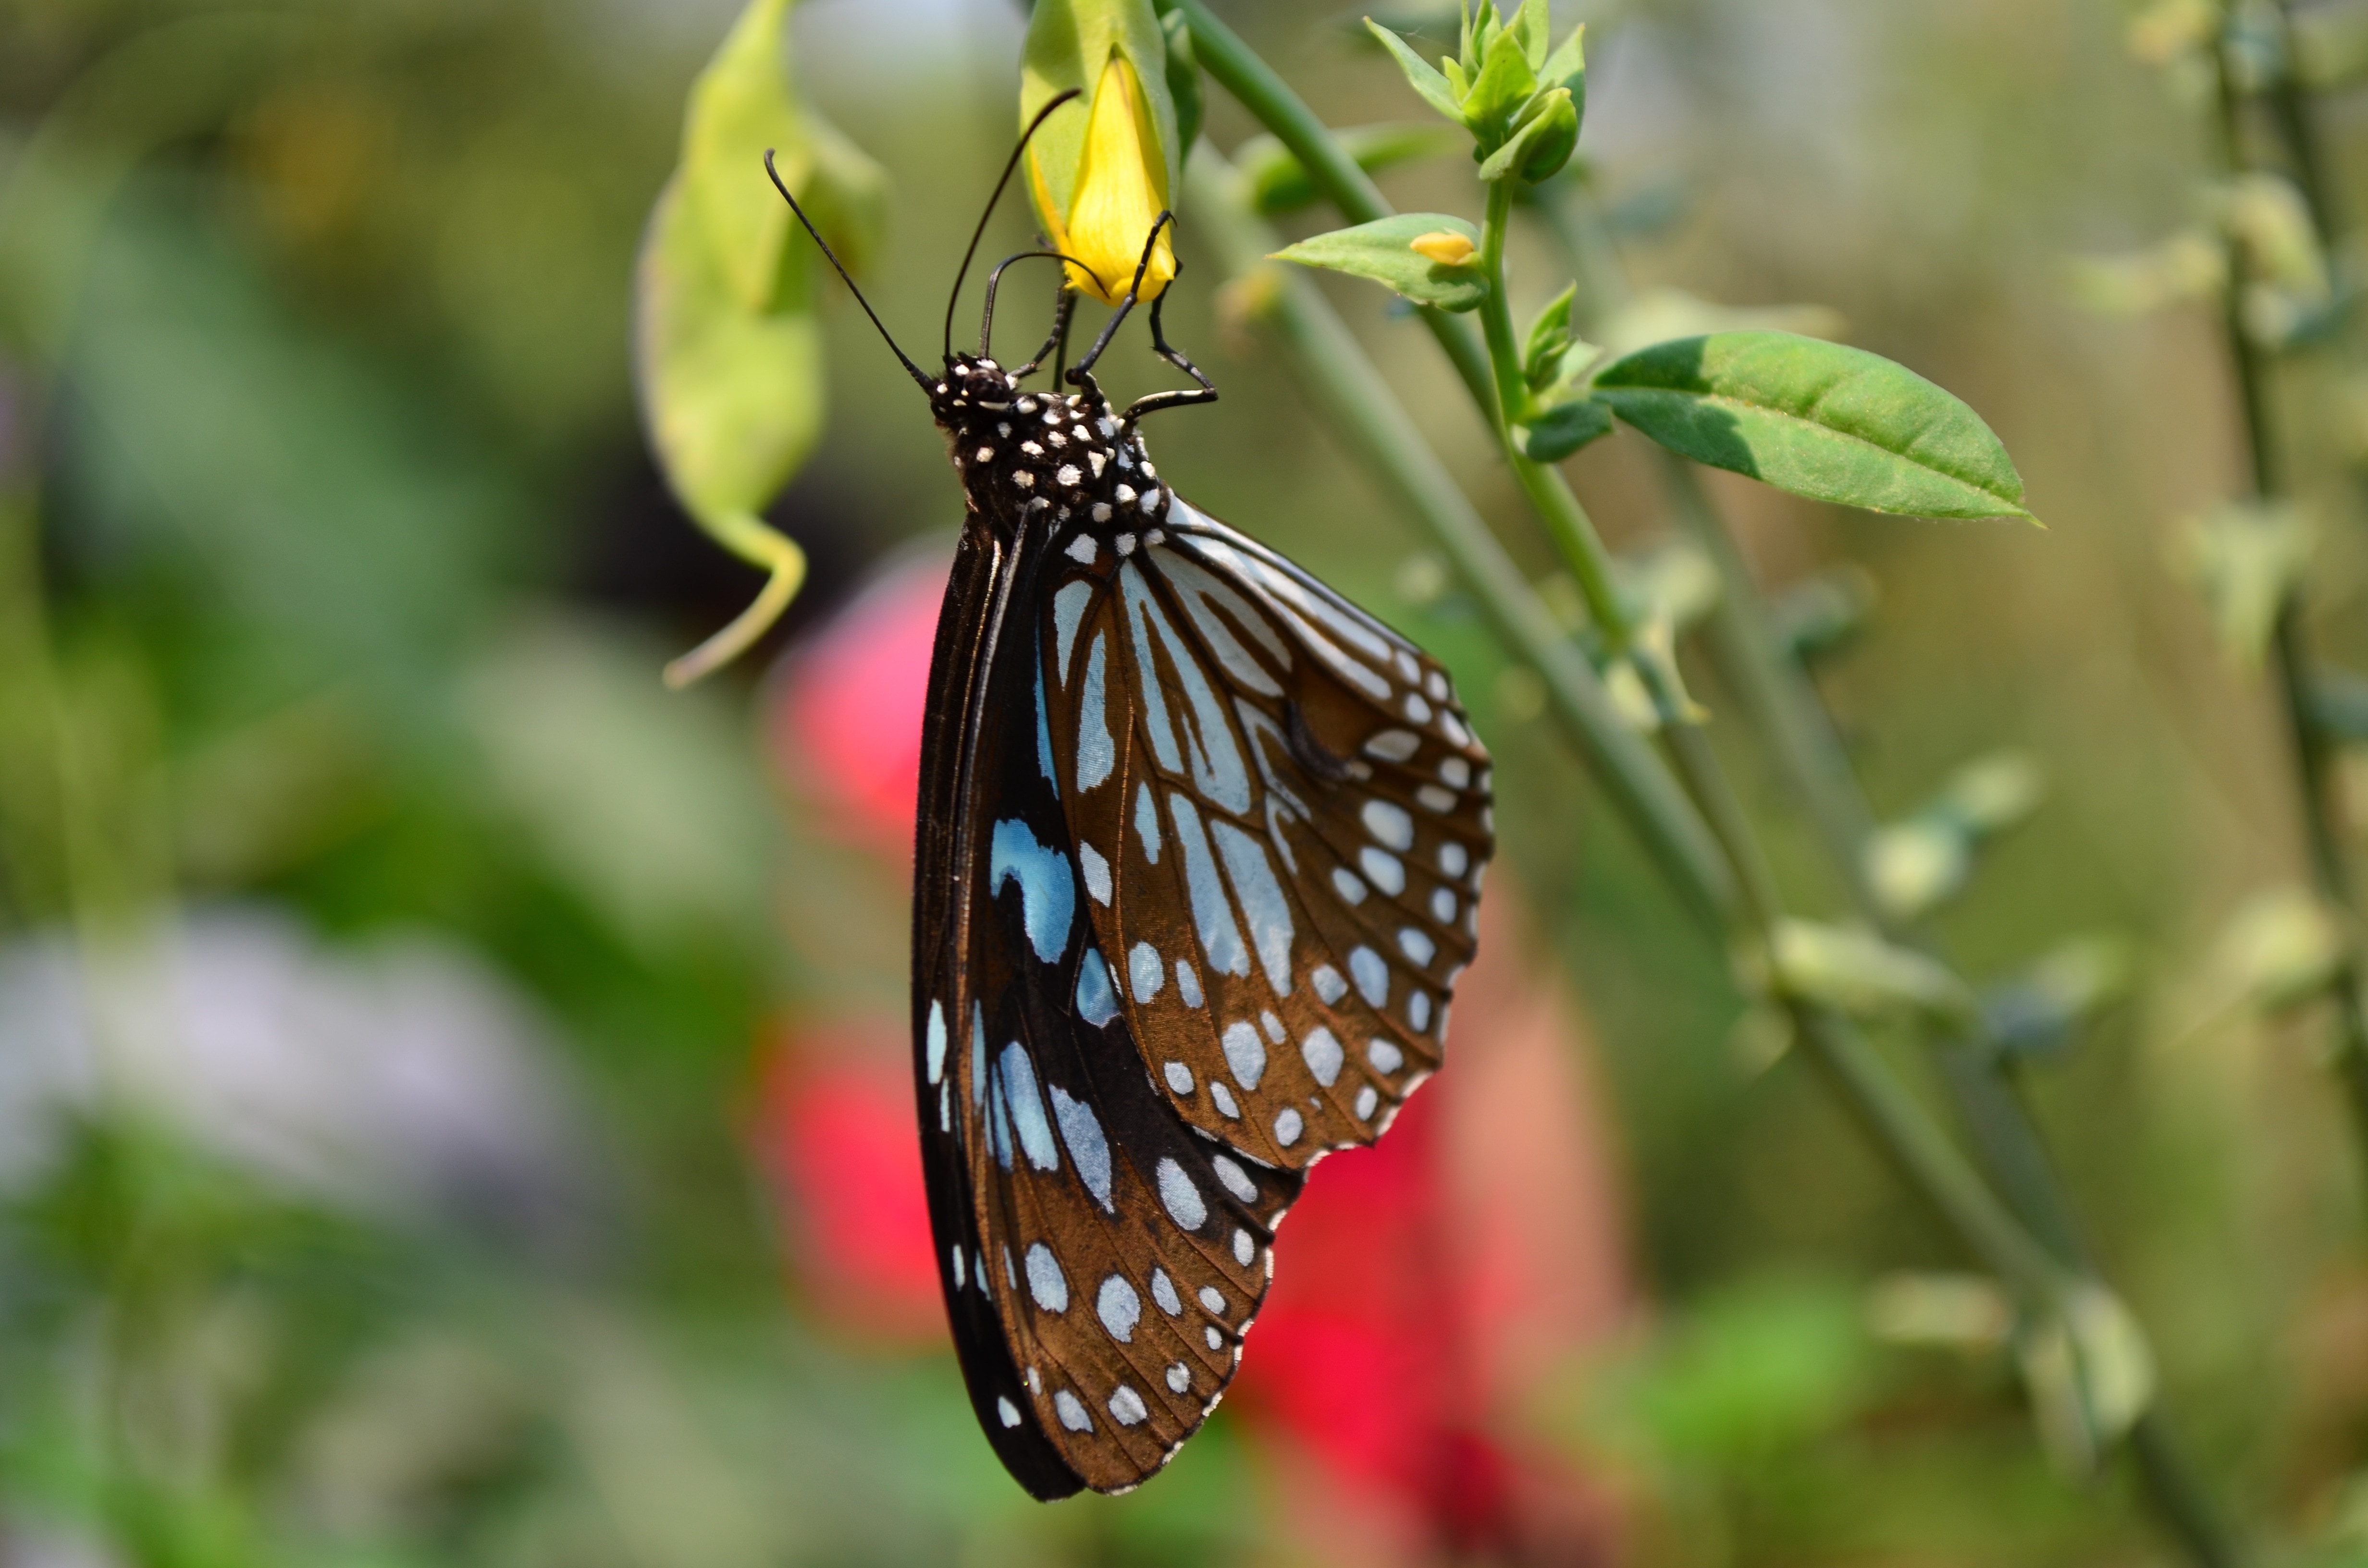 black and blue spotted butterfly